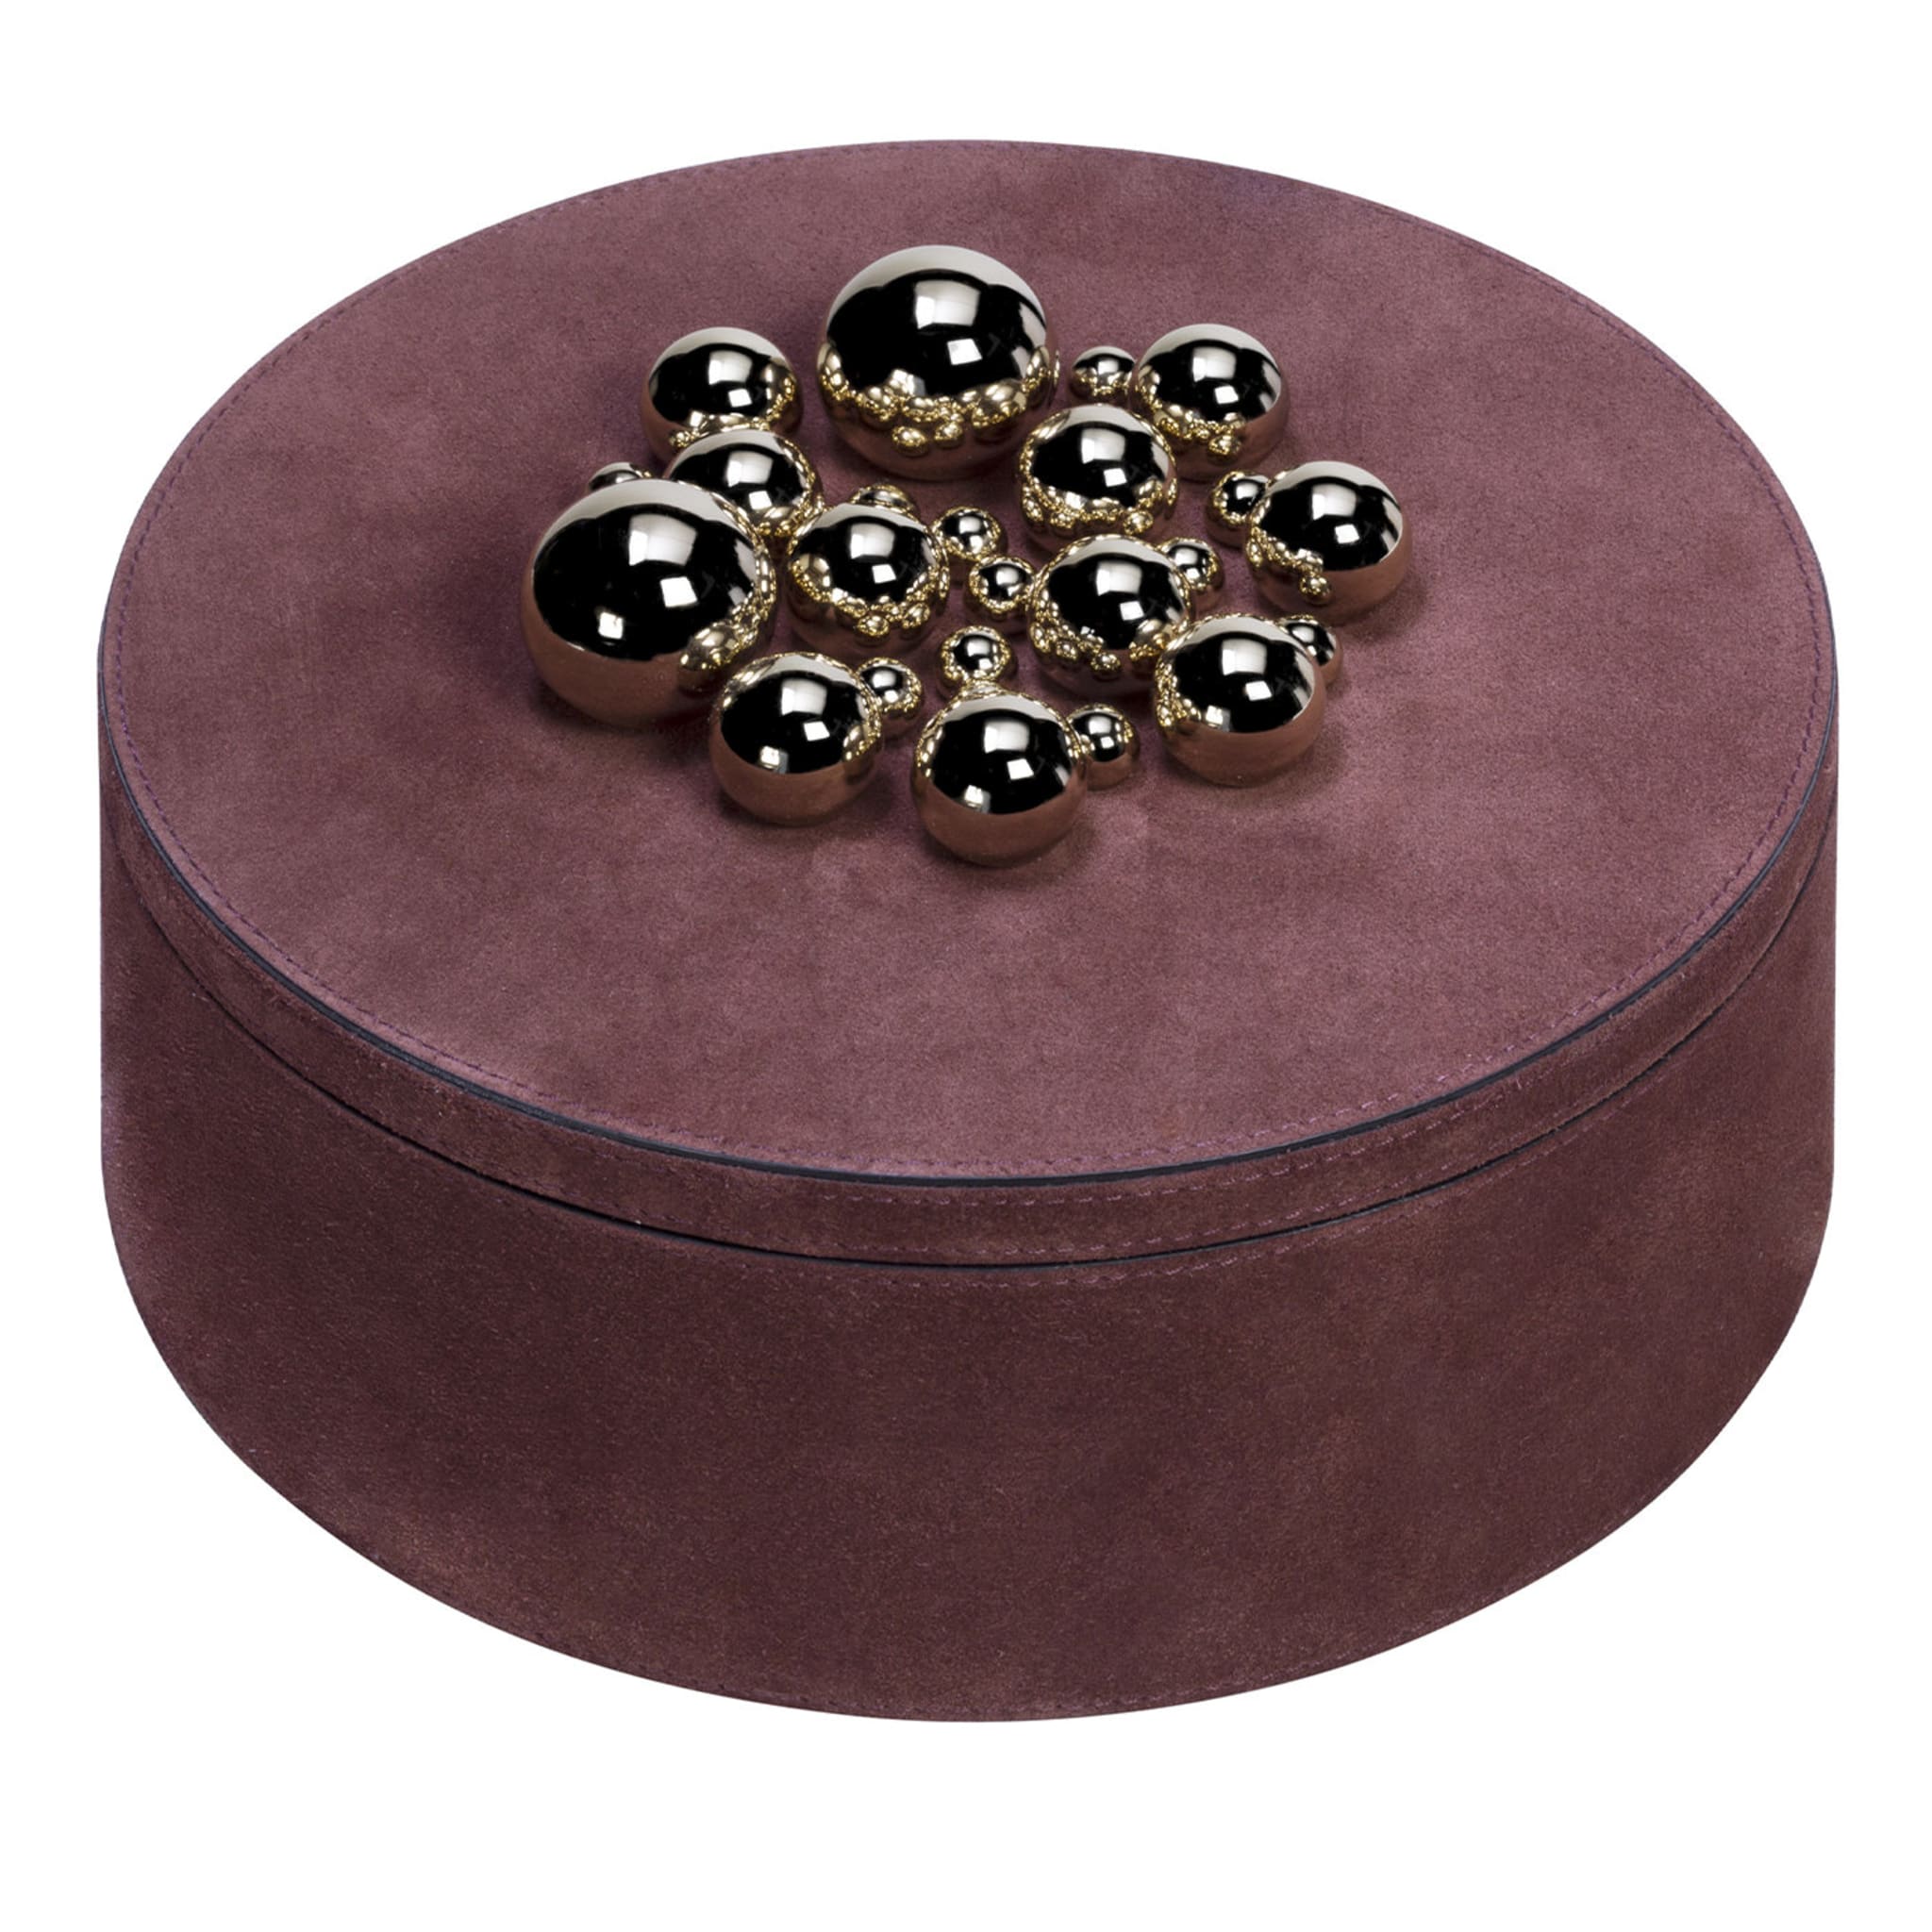 Champagne Sphérades Burgundy Large Round Box - Main view